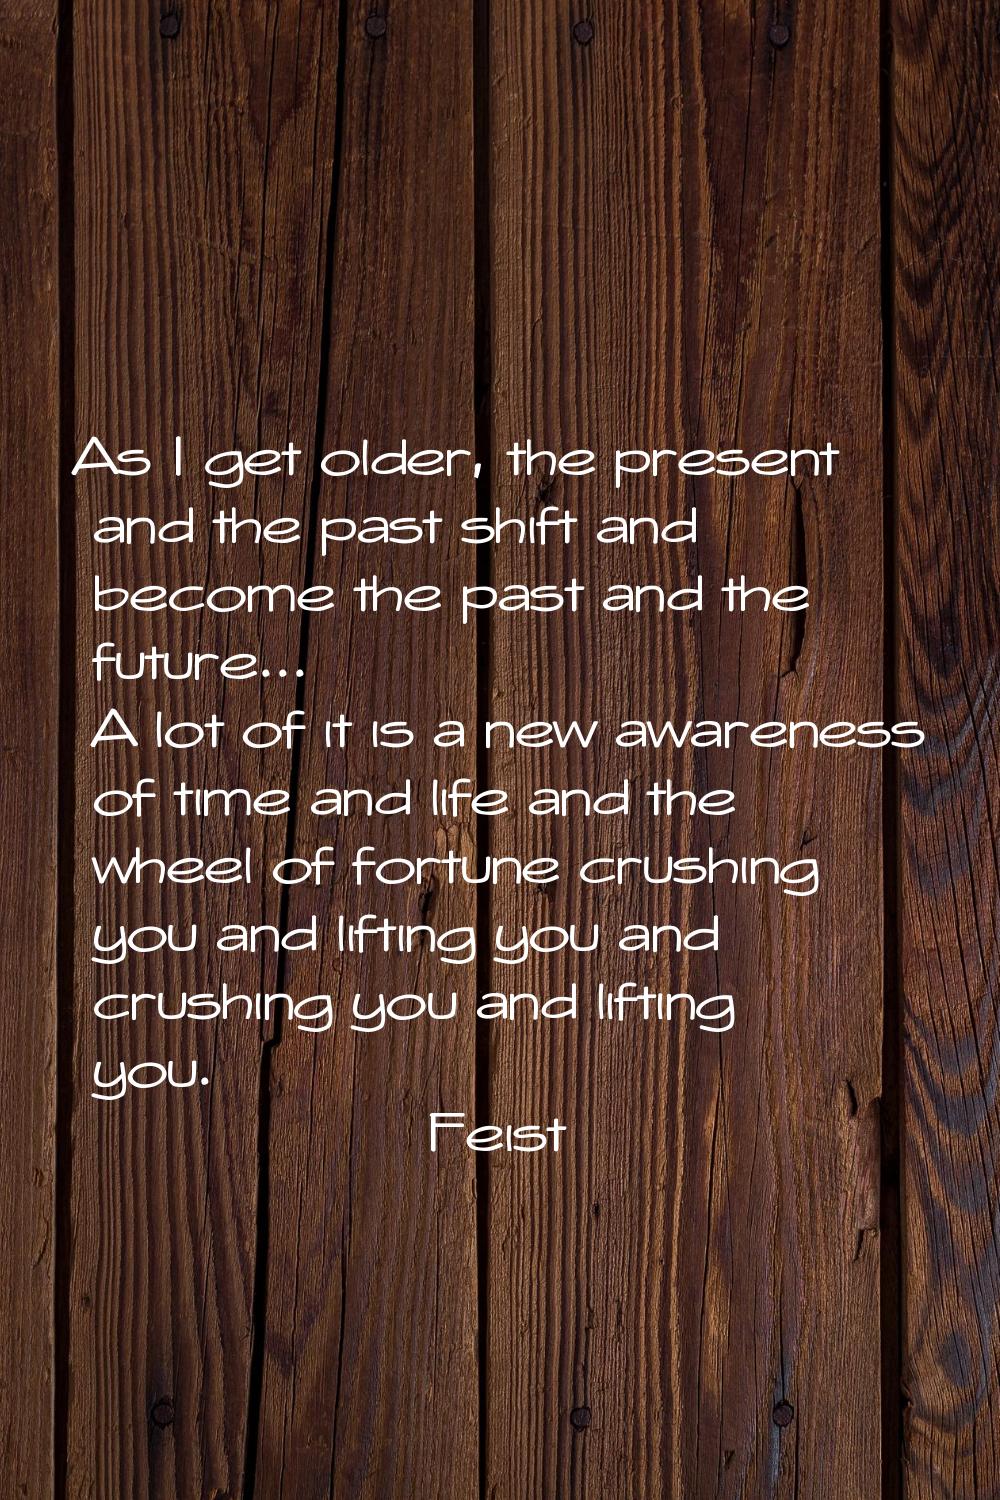 As I get older, the present and the past shift and become the past and the future... A lot of it is